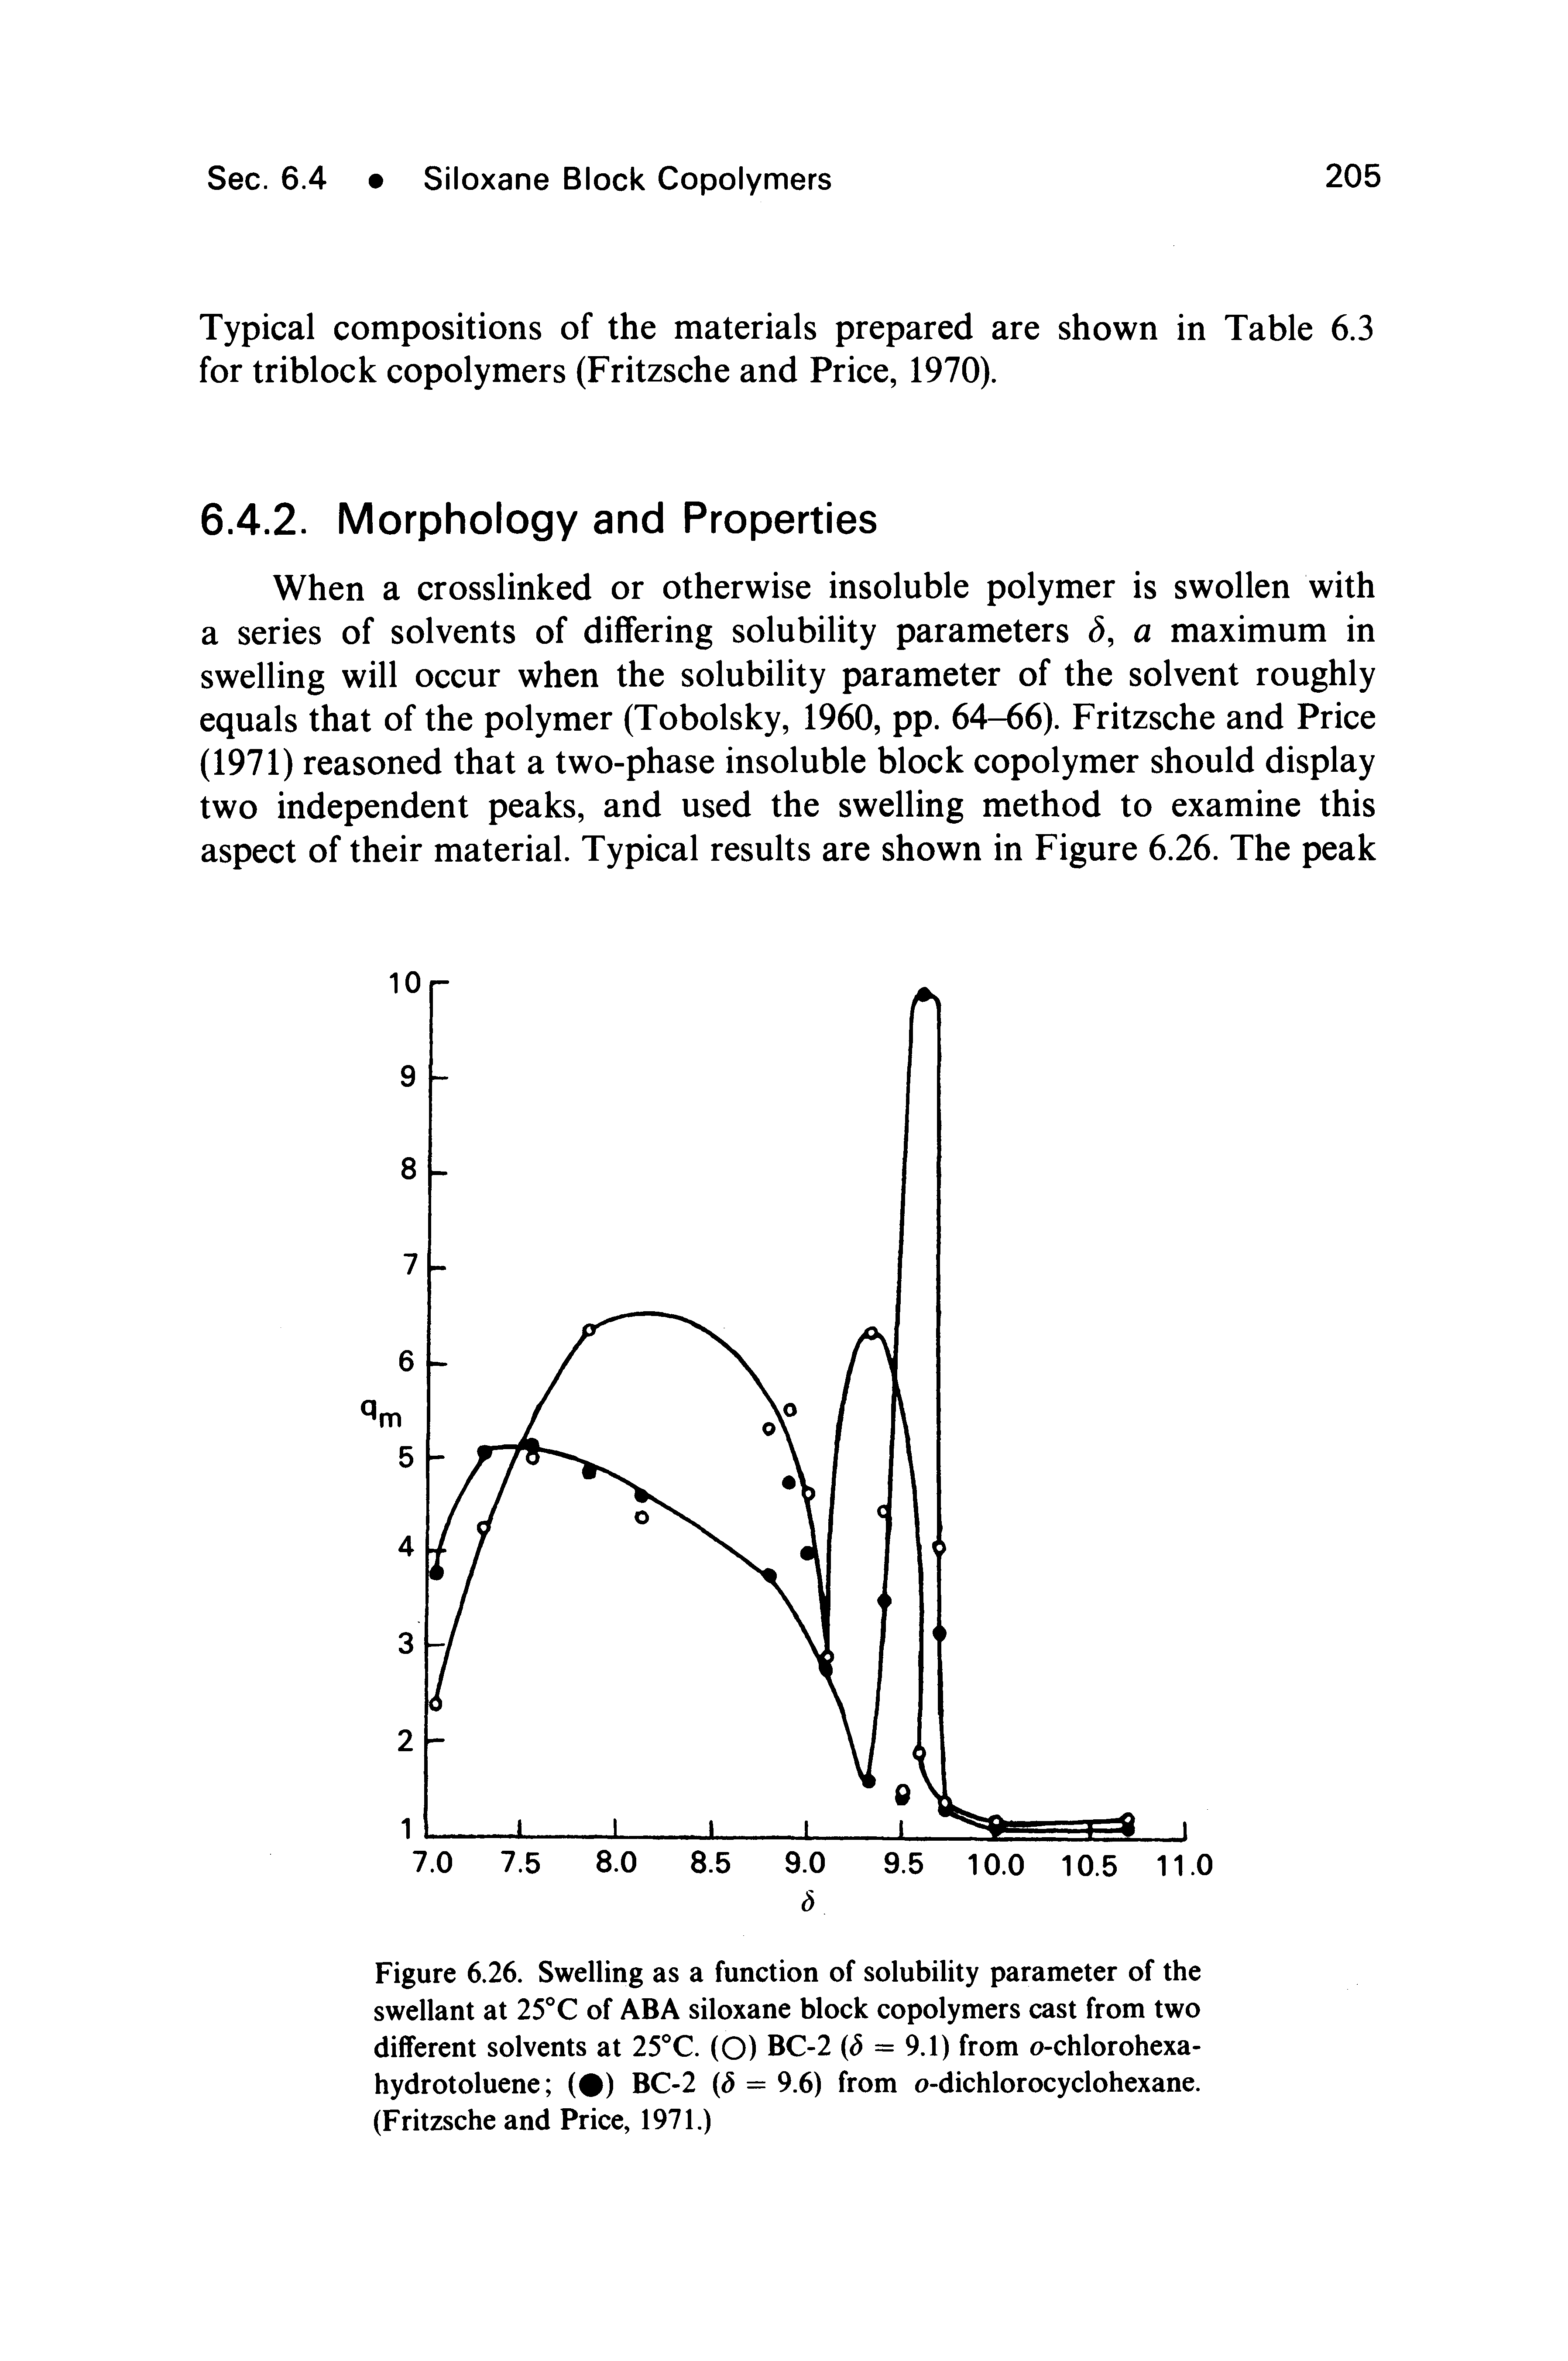 Figure 6.26. Swelling as a function of solubility parameter of the swellant at 25 C of ABA siloxane block copolymers cast from two different solvents at 25°C. (O) BC-2 ( = 9.1) from o-chlorohexa-hydrotoluene ( ) BC-2 = 9.6) from o-dichlorocyclohexane. (Fritzsche and Price, 1971.)...